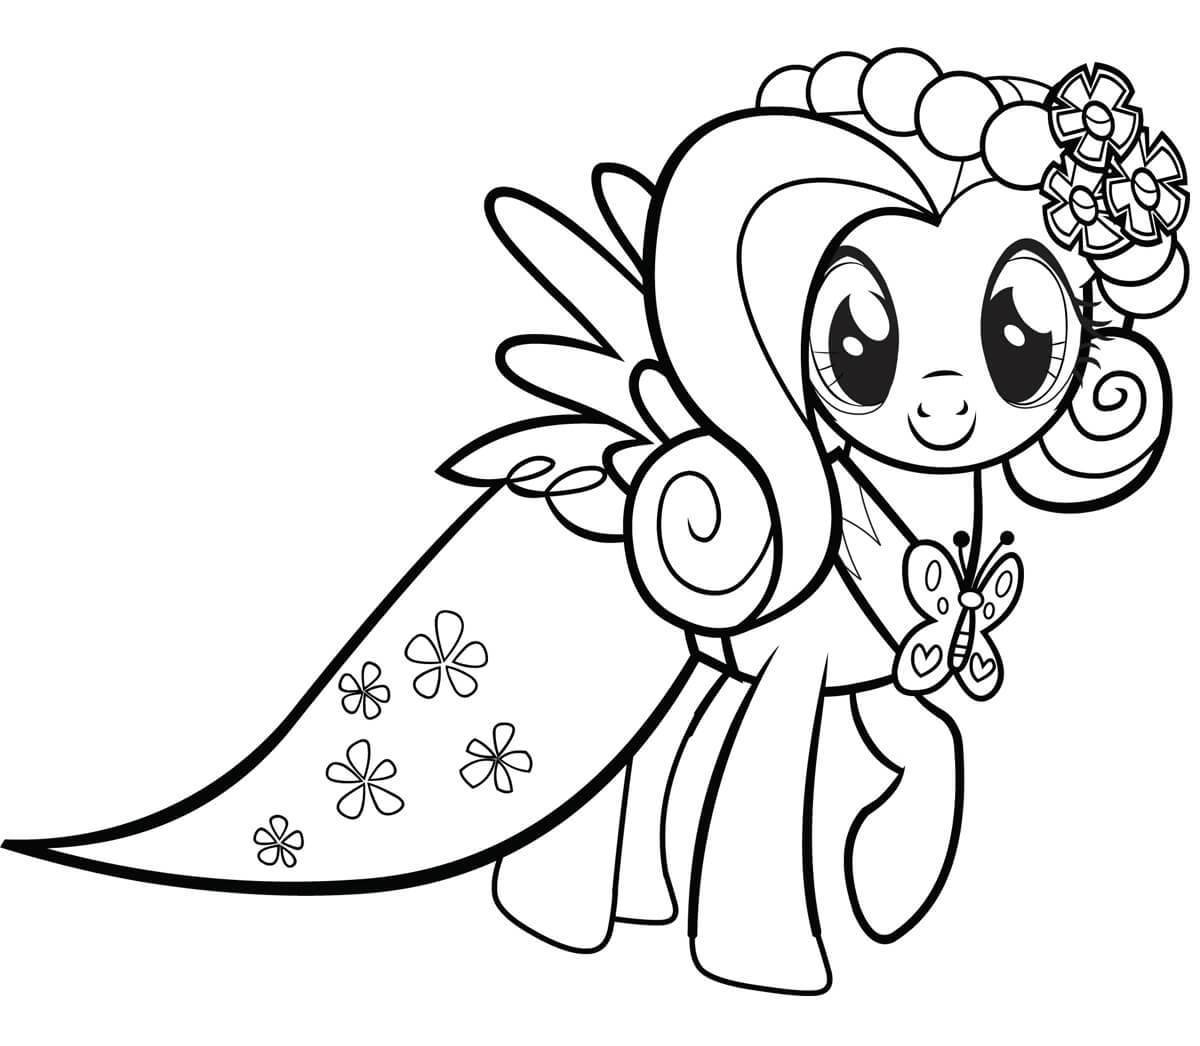 Great pony coloring pages